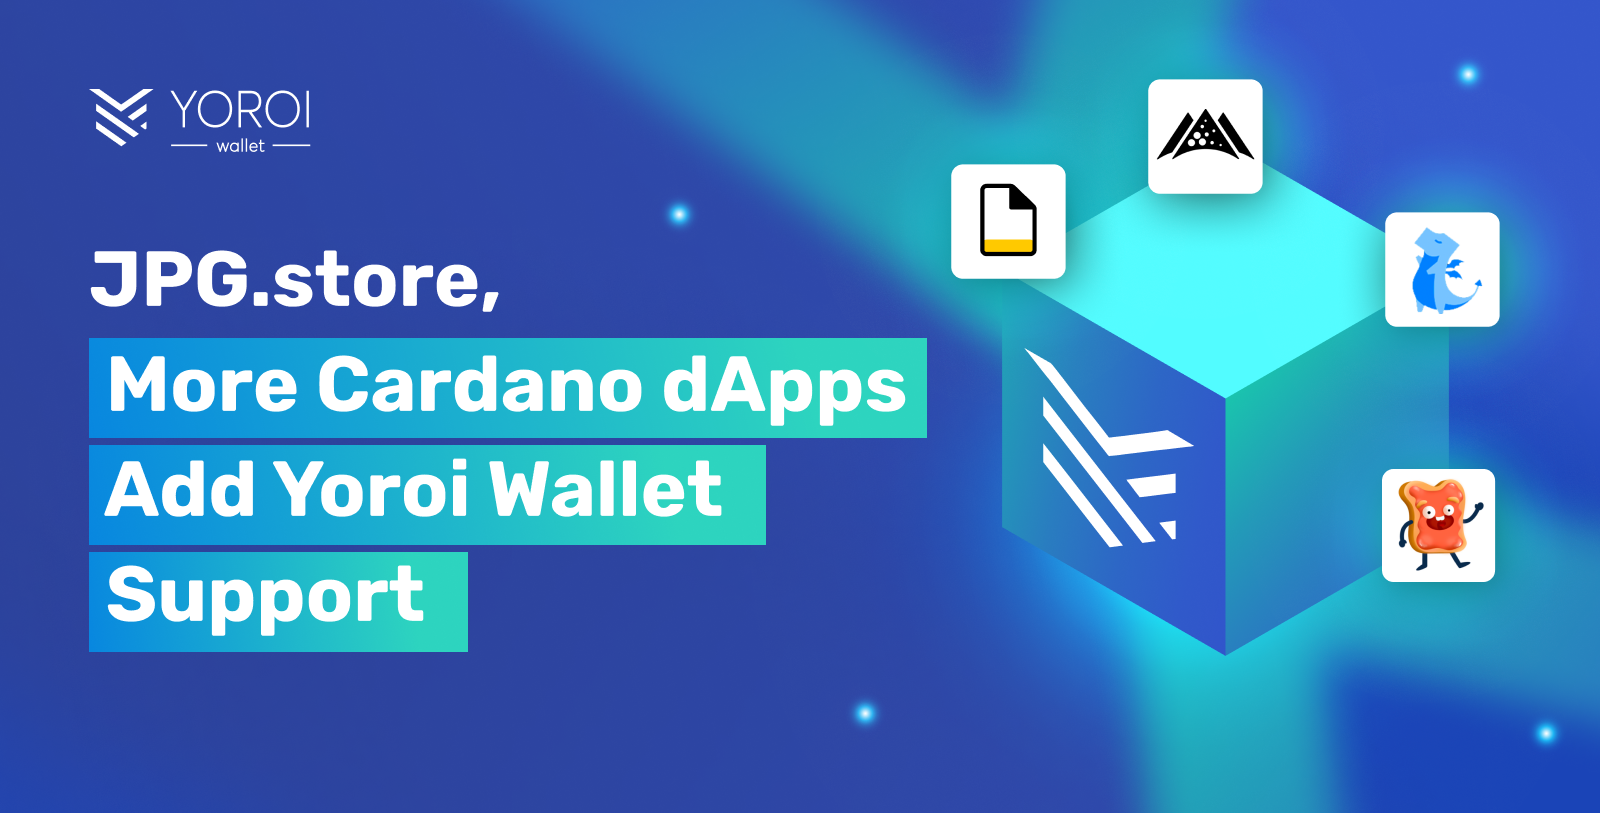 JPG.store-More-Cardano-dApps-Add-Yoroi-Wallet-Support-1